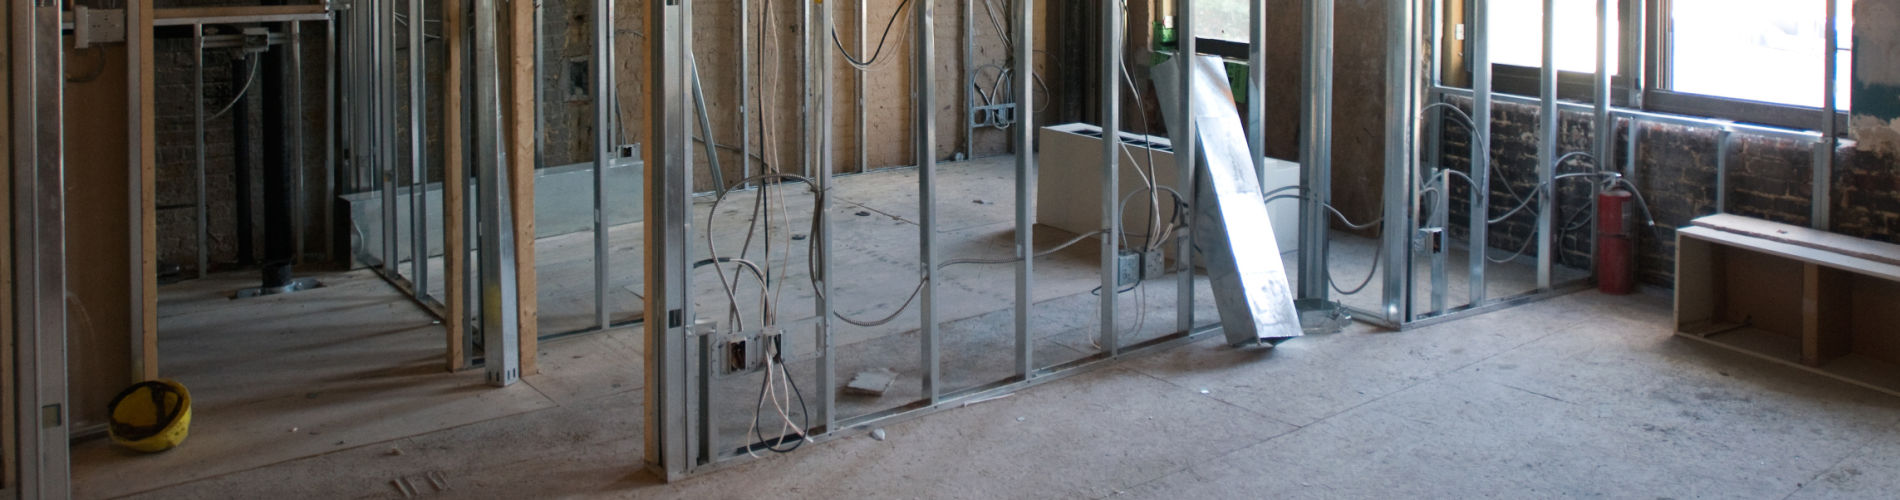 Construction photo of interior of a commercial building